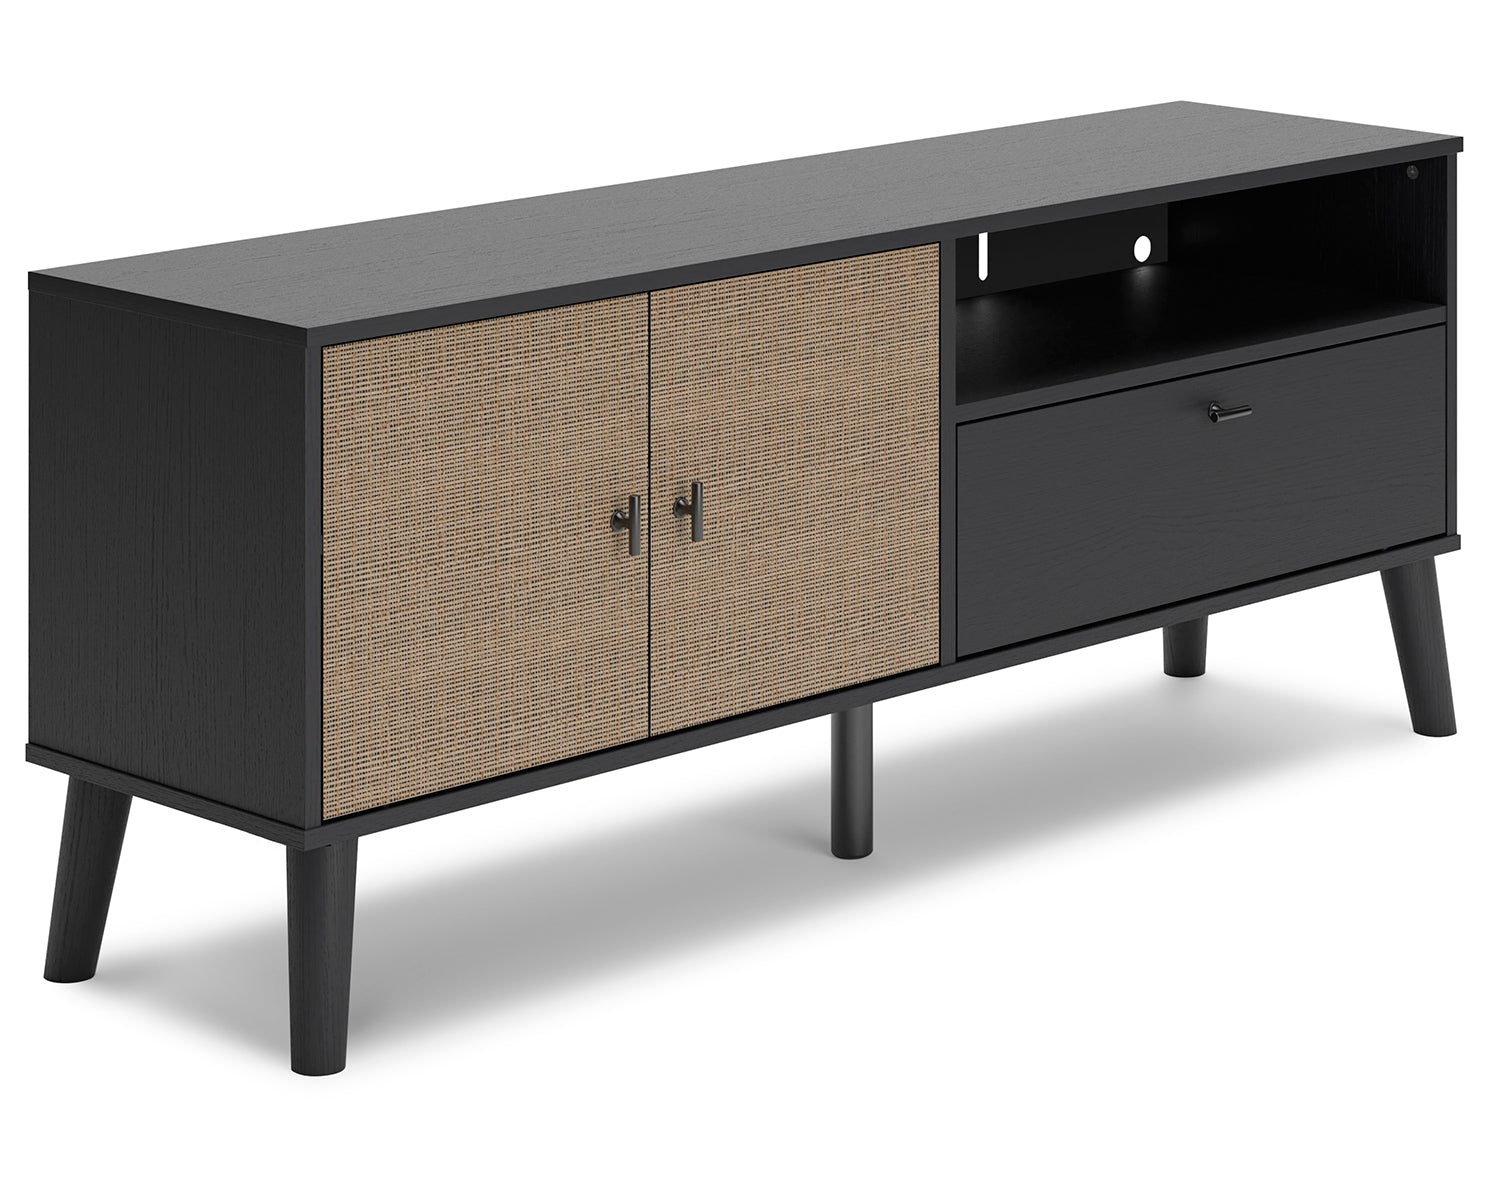 Charlang 59" TV Stand